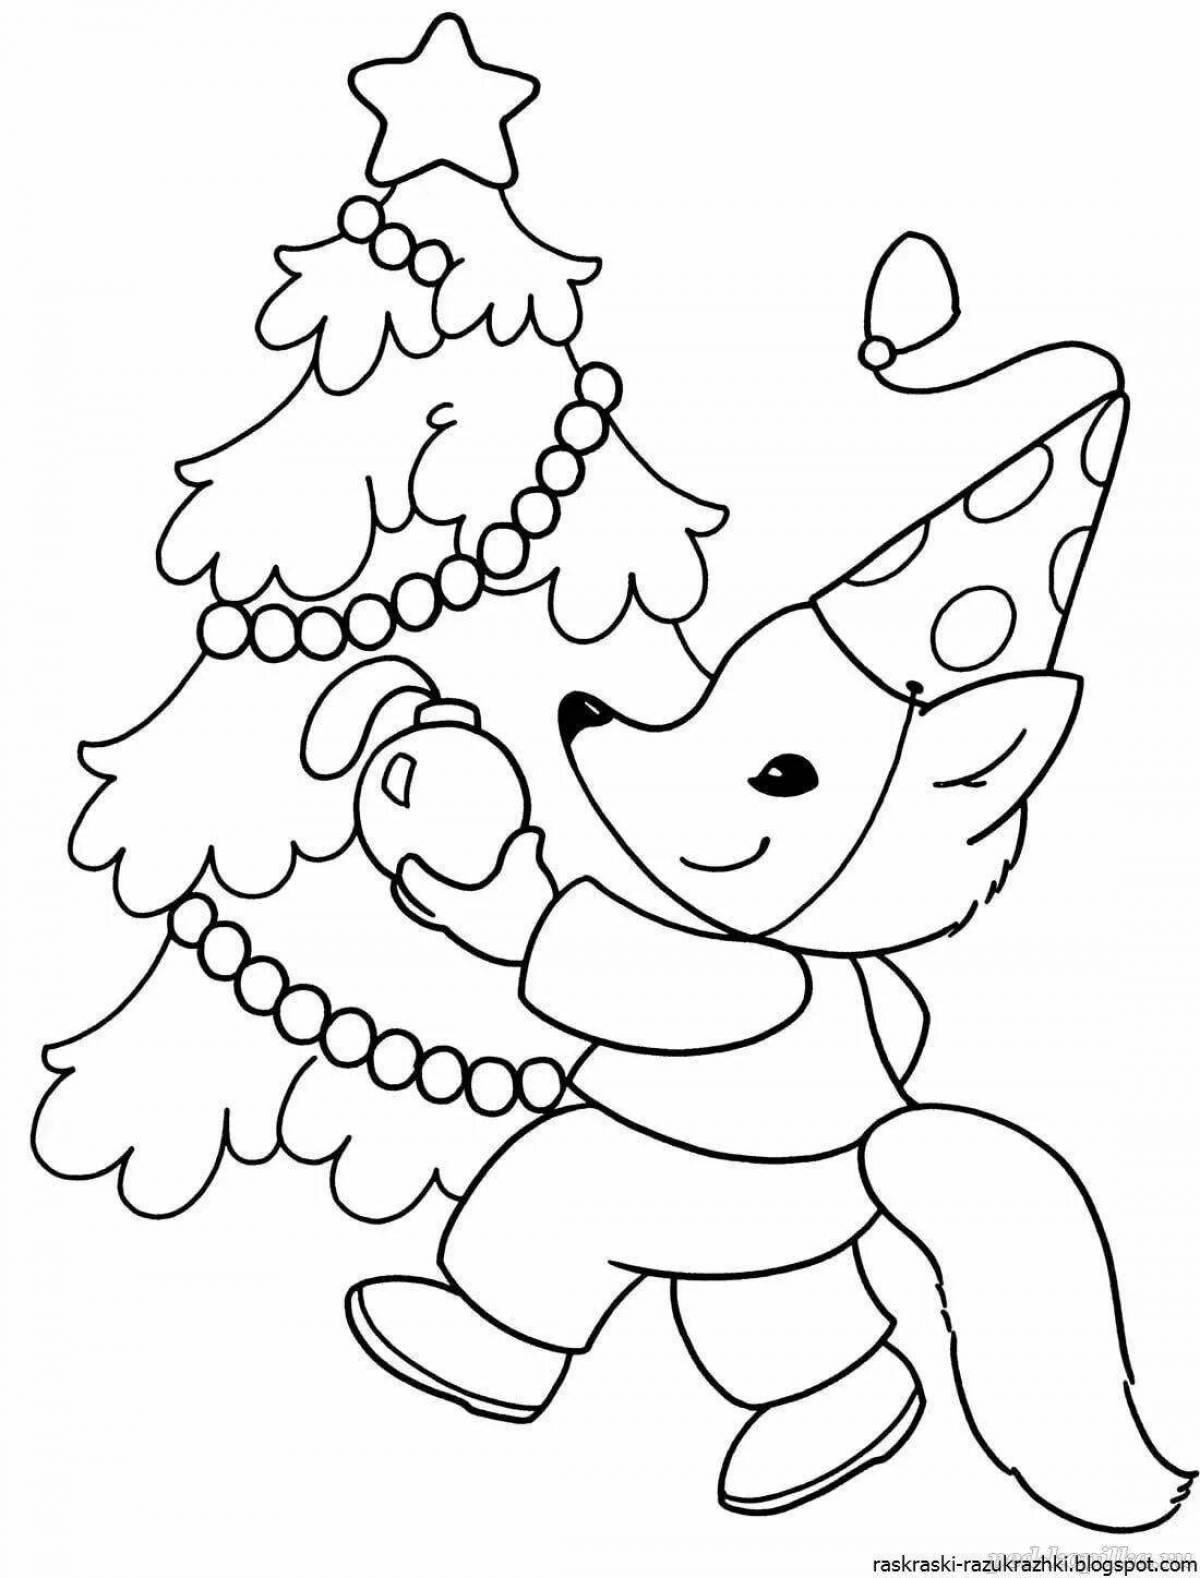 Glorious children's Christmas coloring book